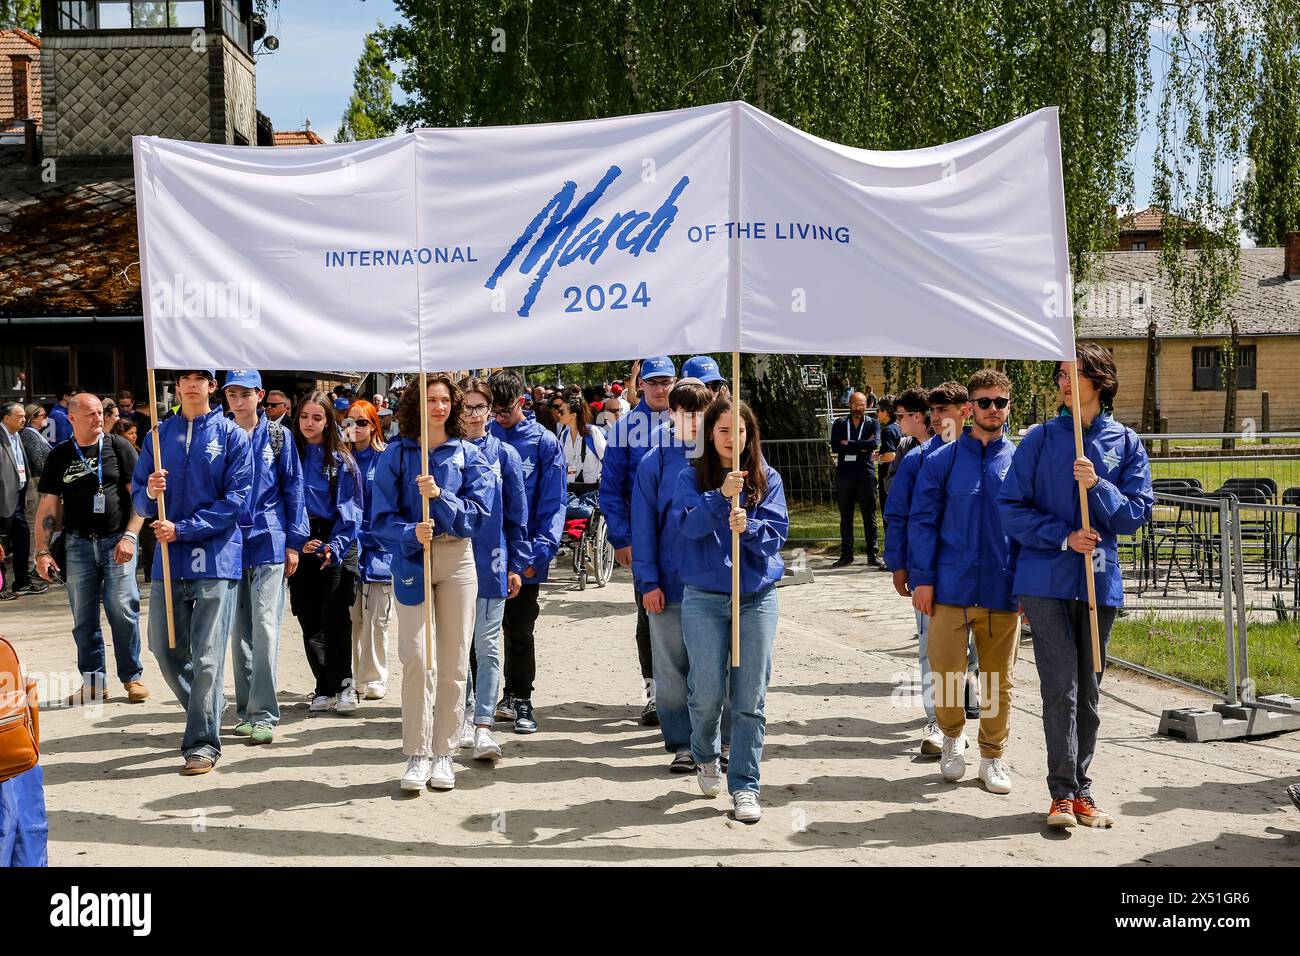 Youth leads the March of the Living 2024 at Auschwitz Camp gate 'Work Makes you Free', with 55 holocaust survivors participating, on May 06, 2024 in O?wi?cim, Poland. Holocaust survivors, and October 7th survivors attend the March of the Living together with a delegation from, among others, the United States, Canada, Italy, United Kingdom. On Holocaust Memorial Day observed in the Jewish calendar (Yom HaShoah), thousands of participants march silently from Auschwitz to Birkenau. The march has an educational and remembrance purpose. This year March was highly politicized due to the Israeli war Stock Photo